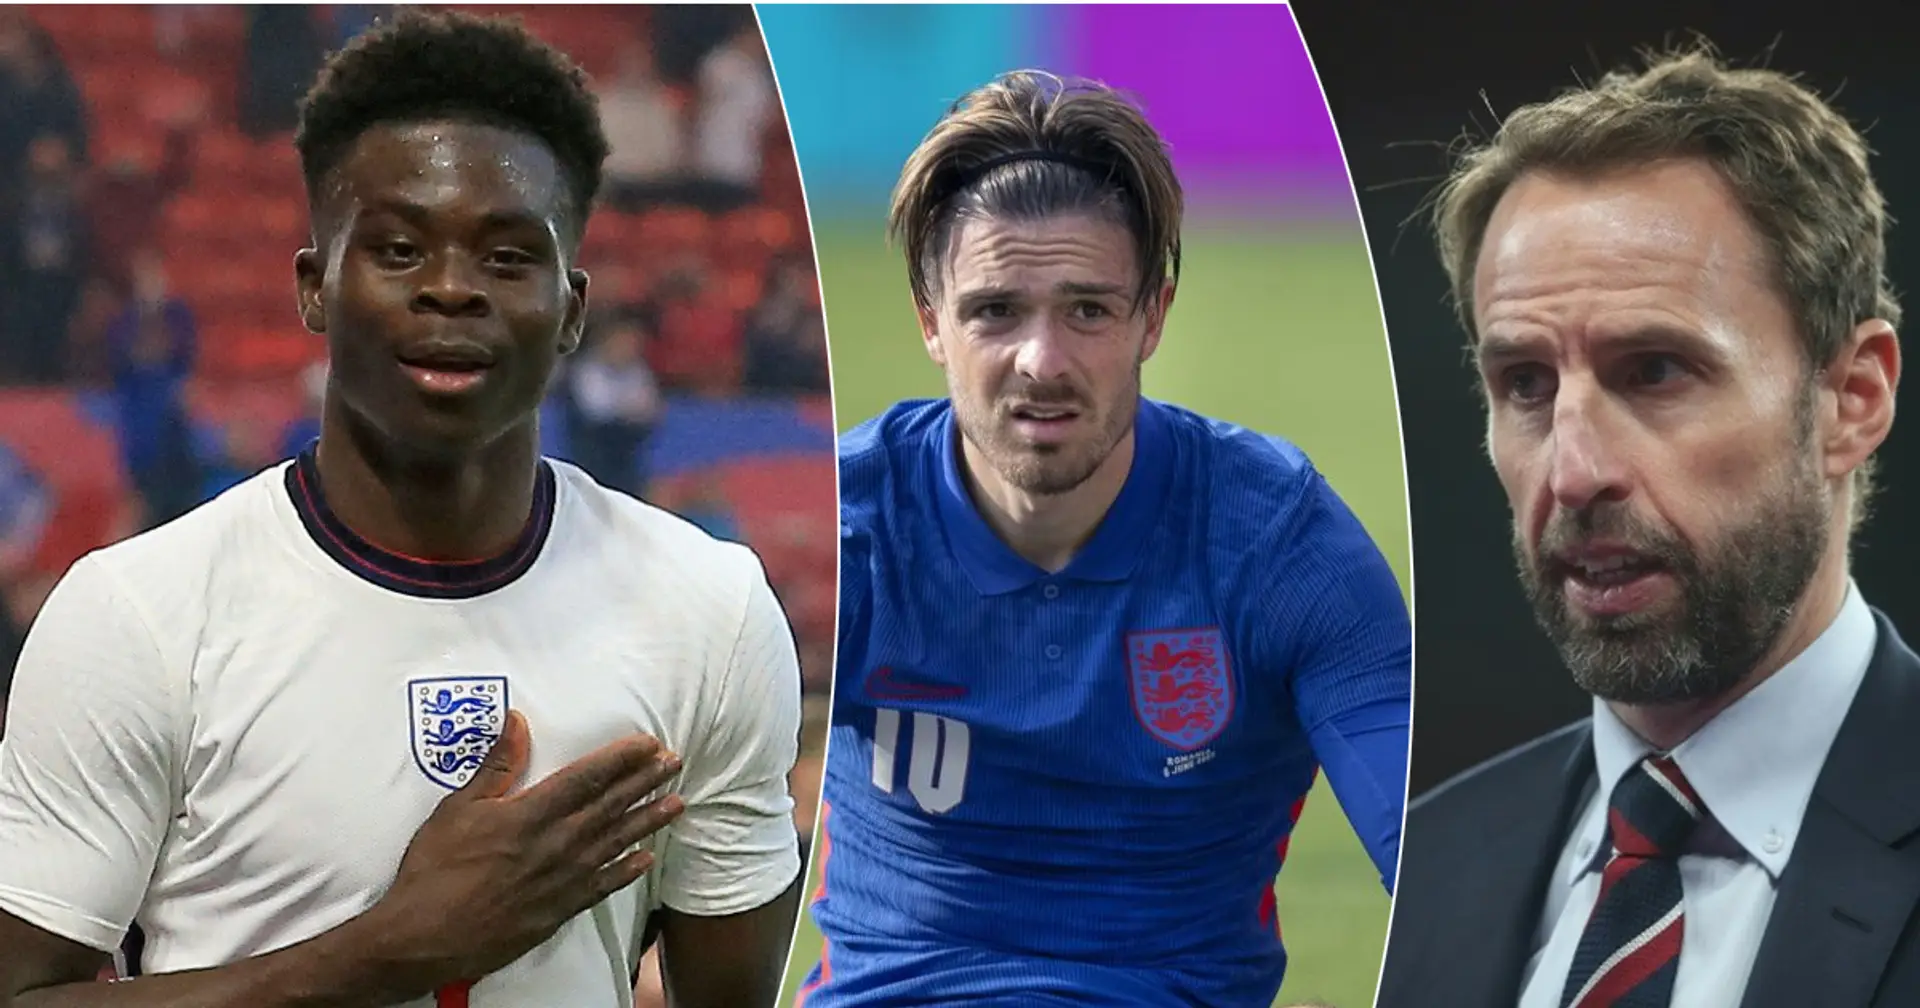 Saka not in England's starting XI for Croatia game, Grealish also snubbed